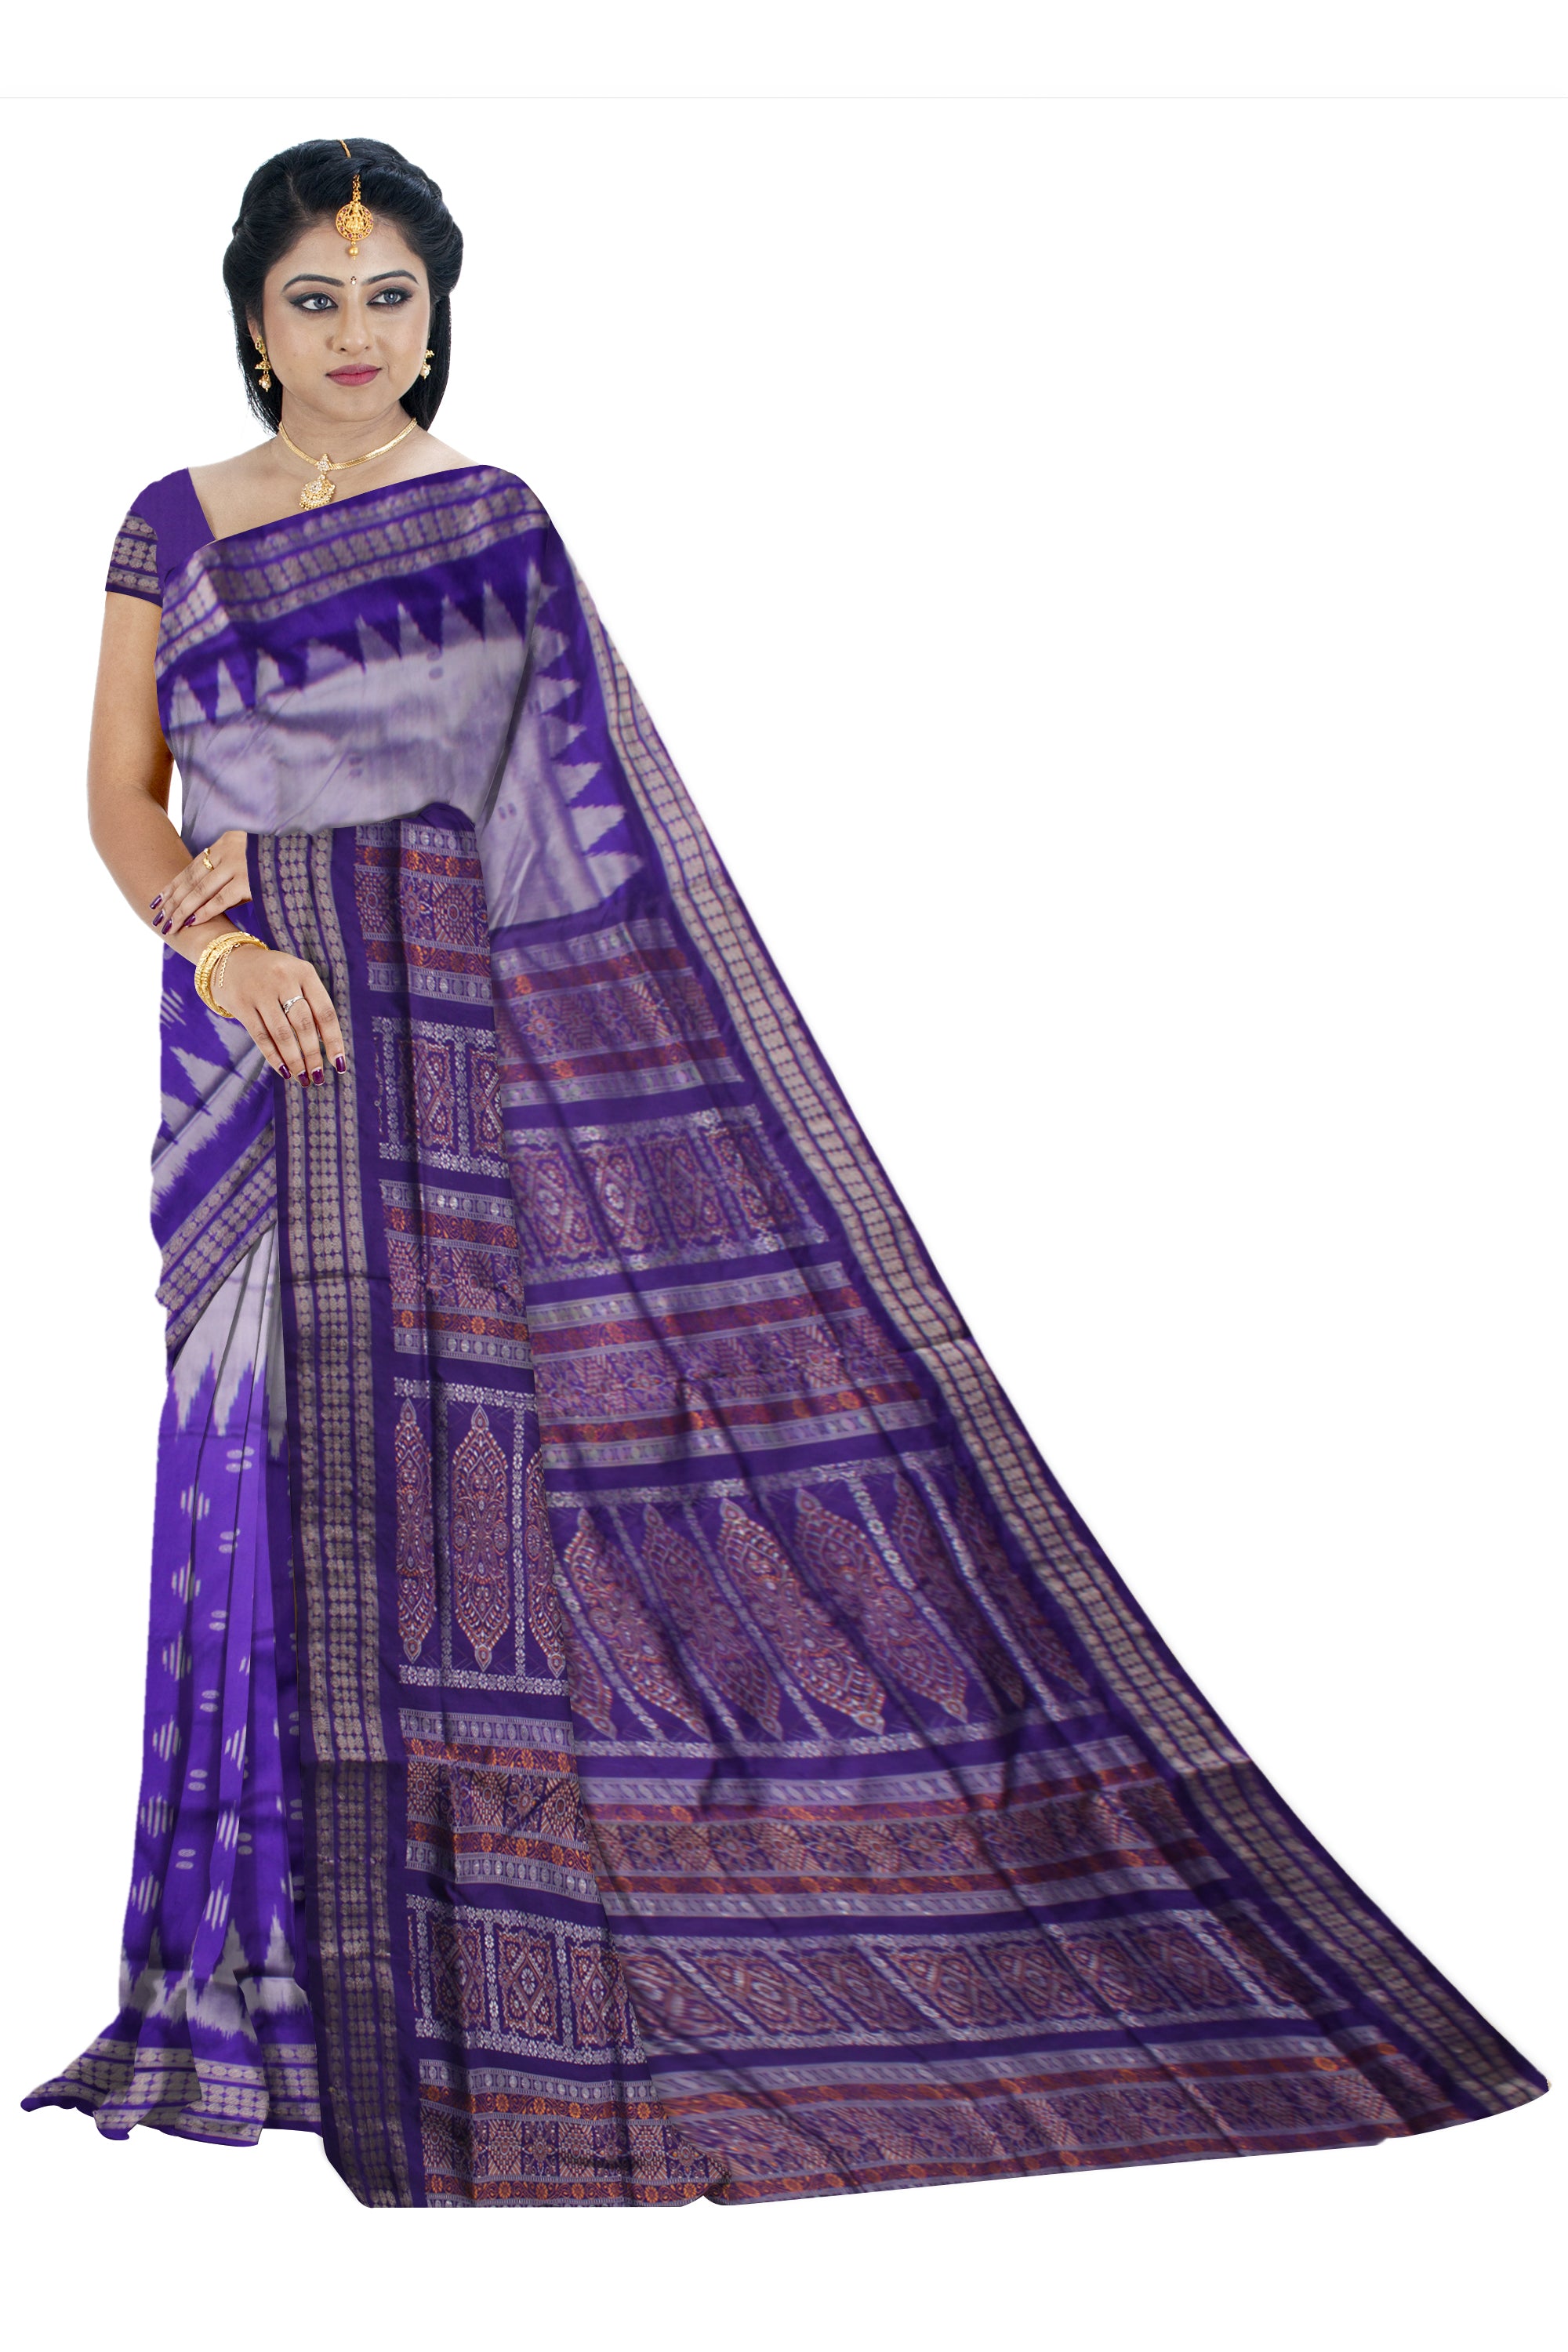 SILVER AND PURPLE COLOR IKAT PATTERN PATA SAREE, COMES WITH MATCHING BLOUSE PIECE. - Koshali Arts & Crafts Enterprise